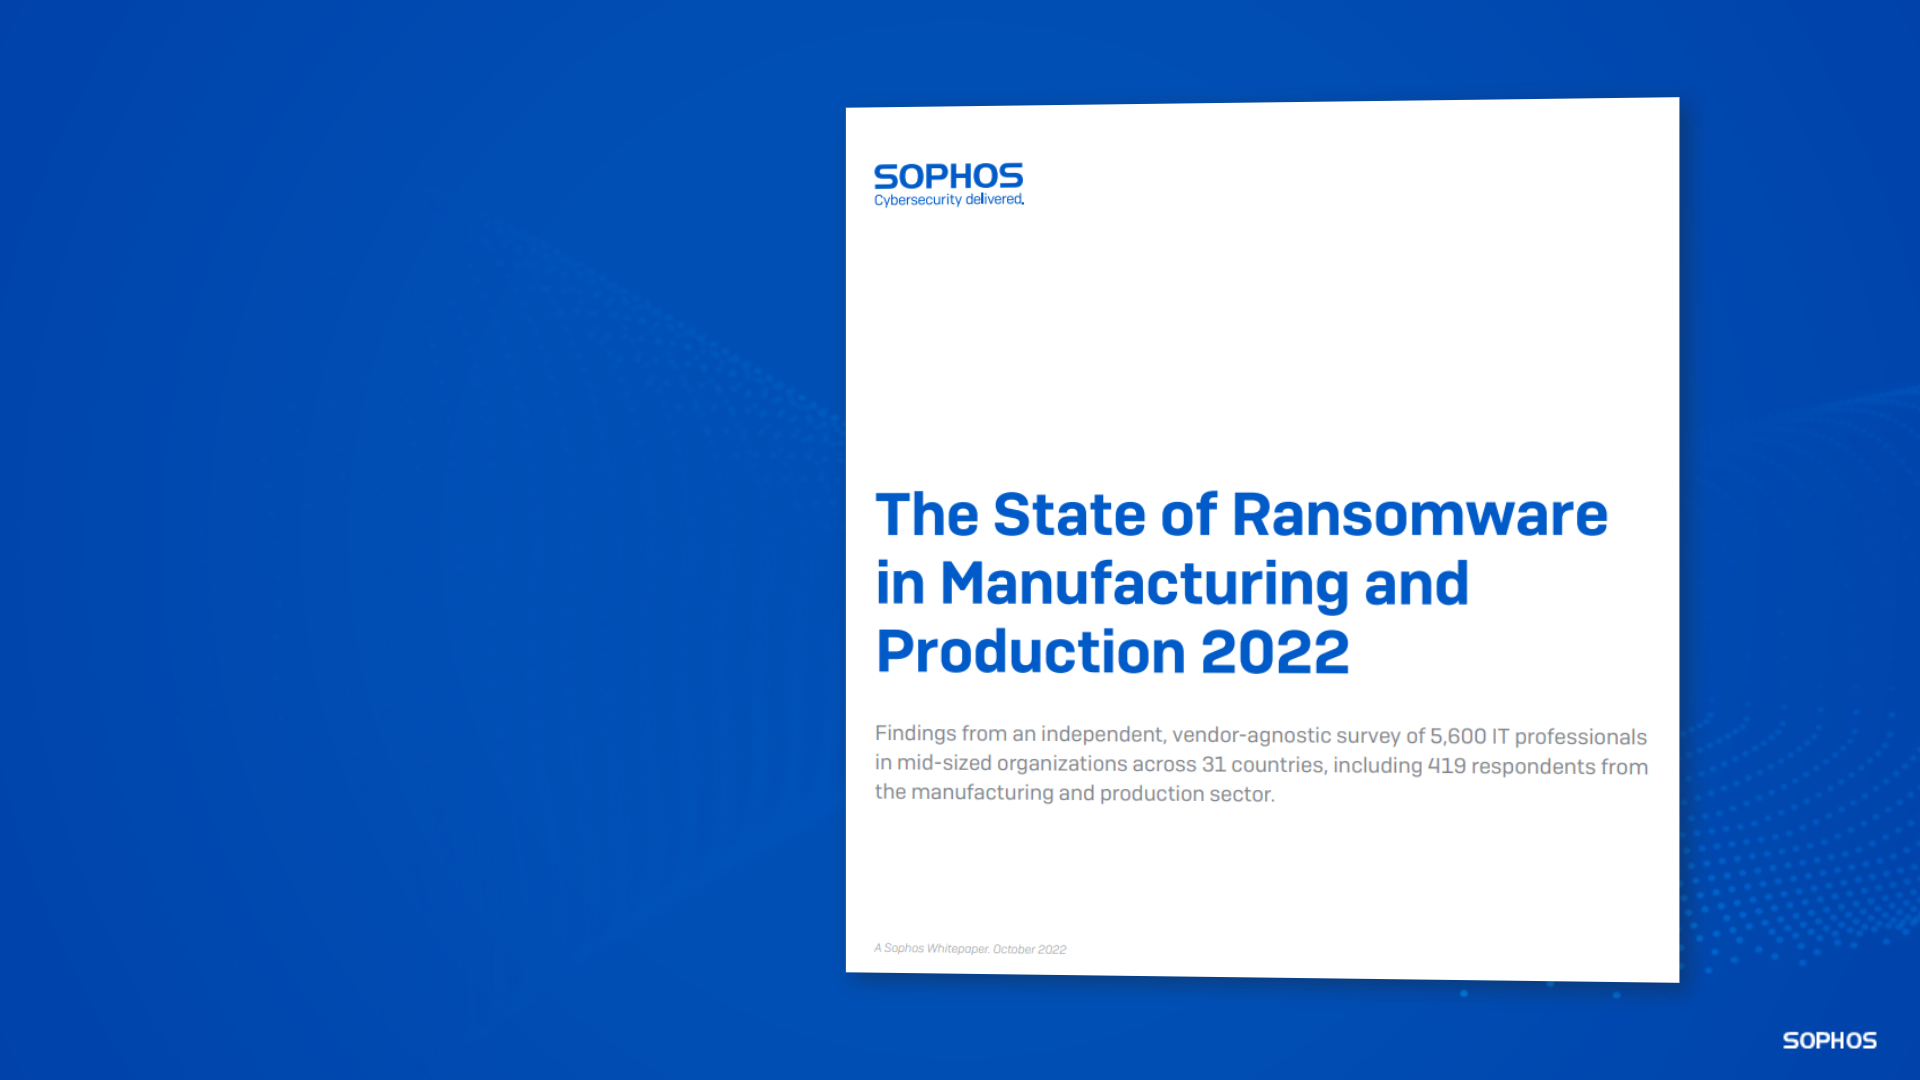 The State of Ransomware in Manufacturing Sector report